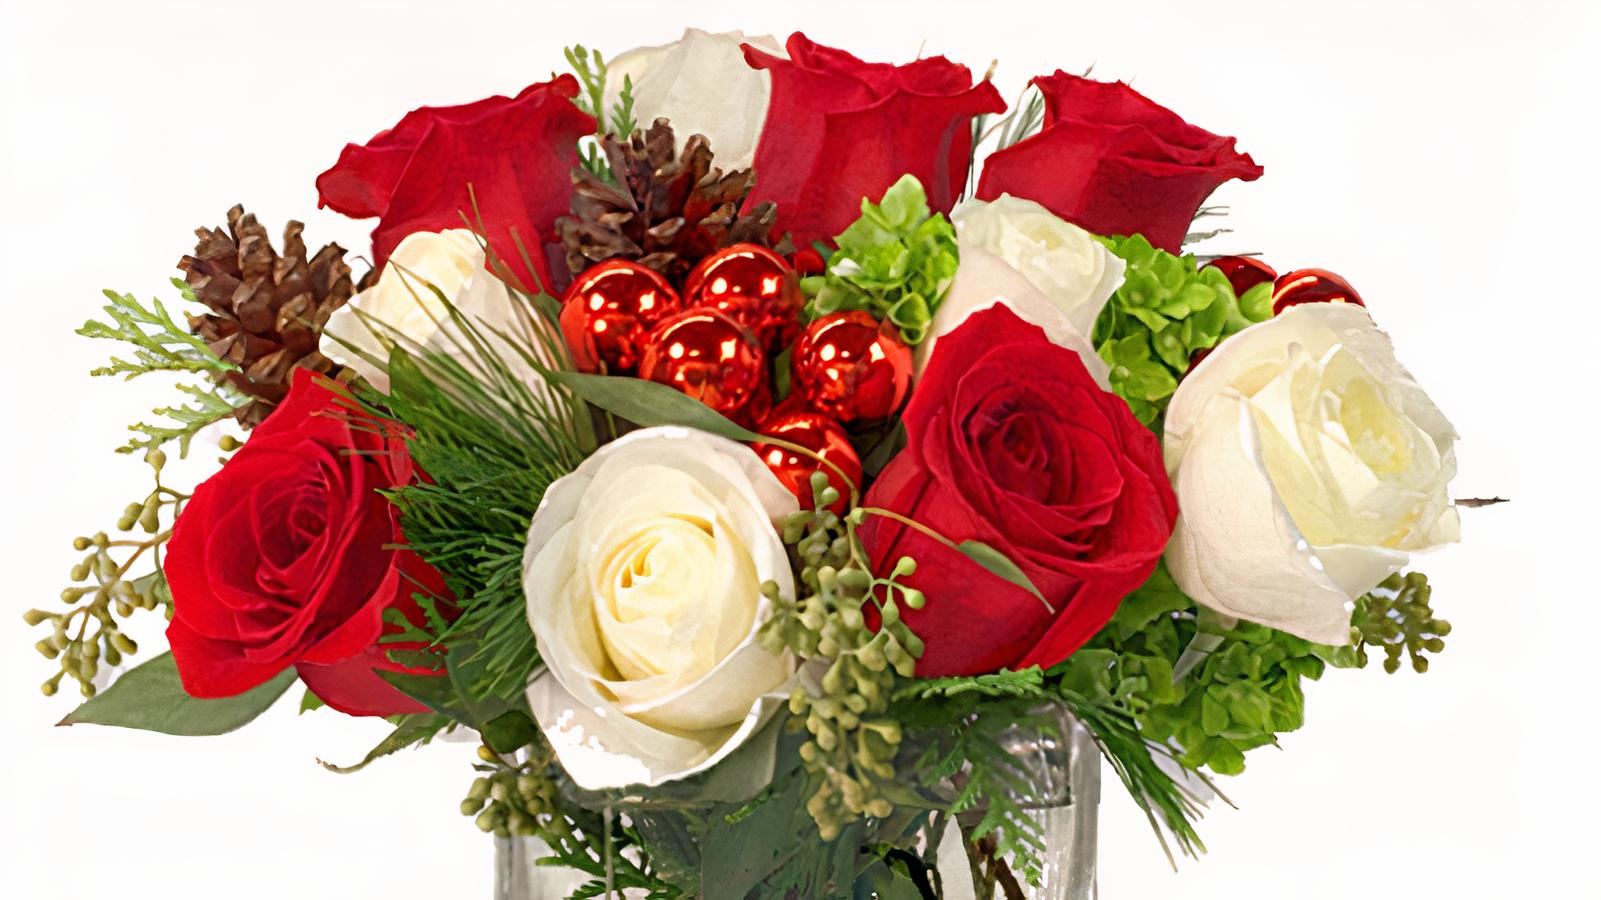 One Dozen Red Roses #0012X - Florist Delivery in Chicago and Suburbs